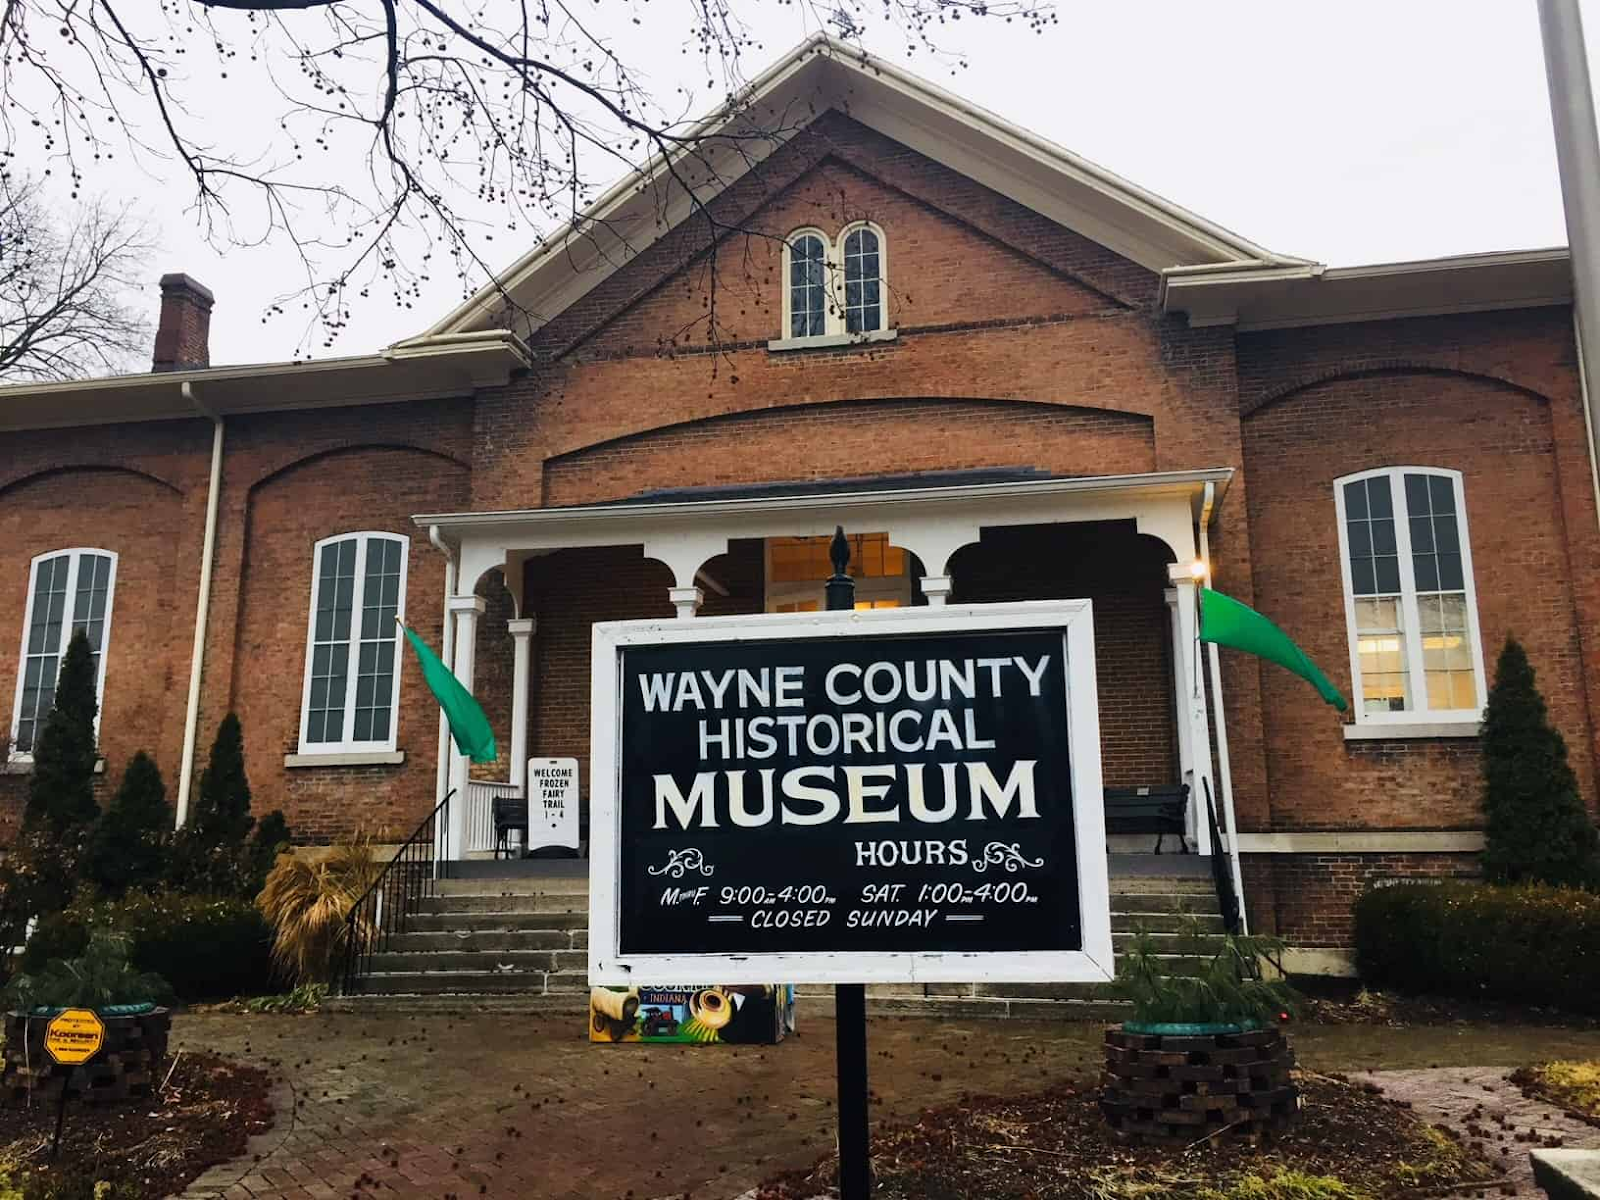 If you’re a history fan, Wayne County Historical Museum is for you. - Travel Indiana